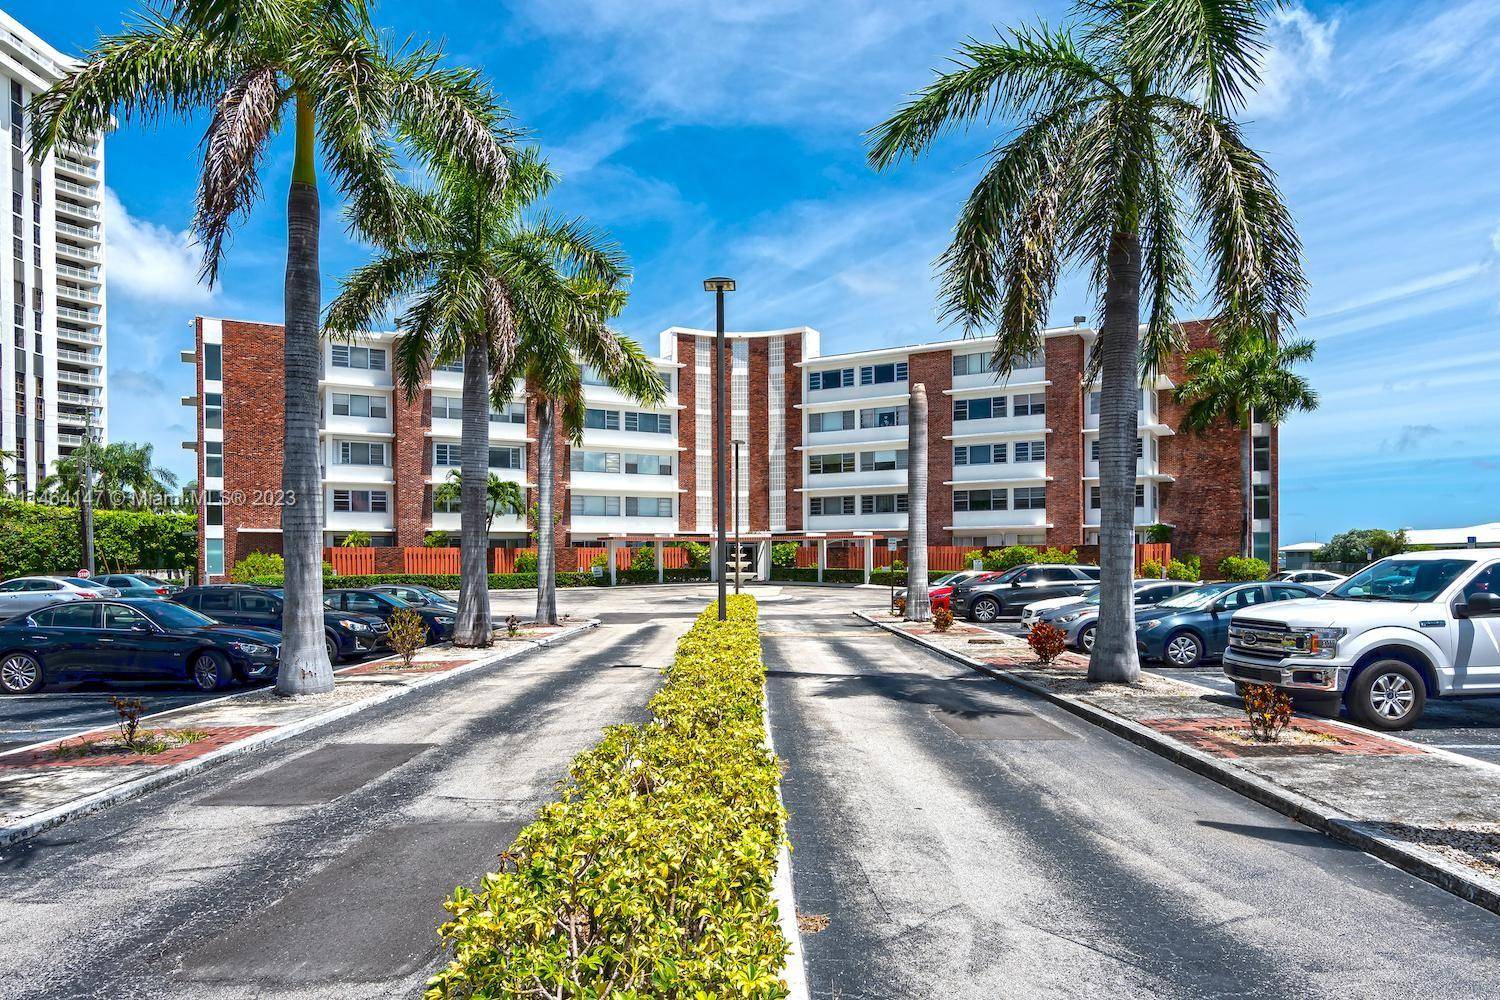 Miami shores waterfront condo, unit was tOTALLY remodeled in 2020, new bathrooms, new kitchen.